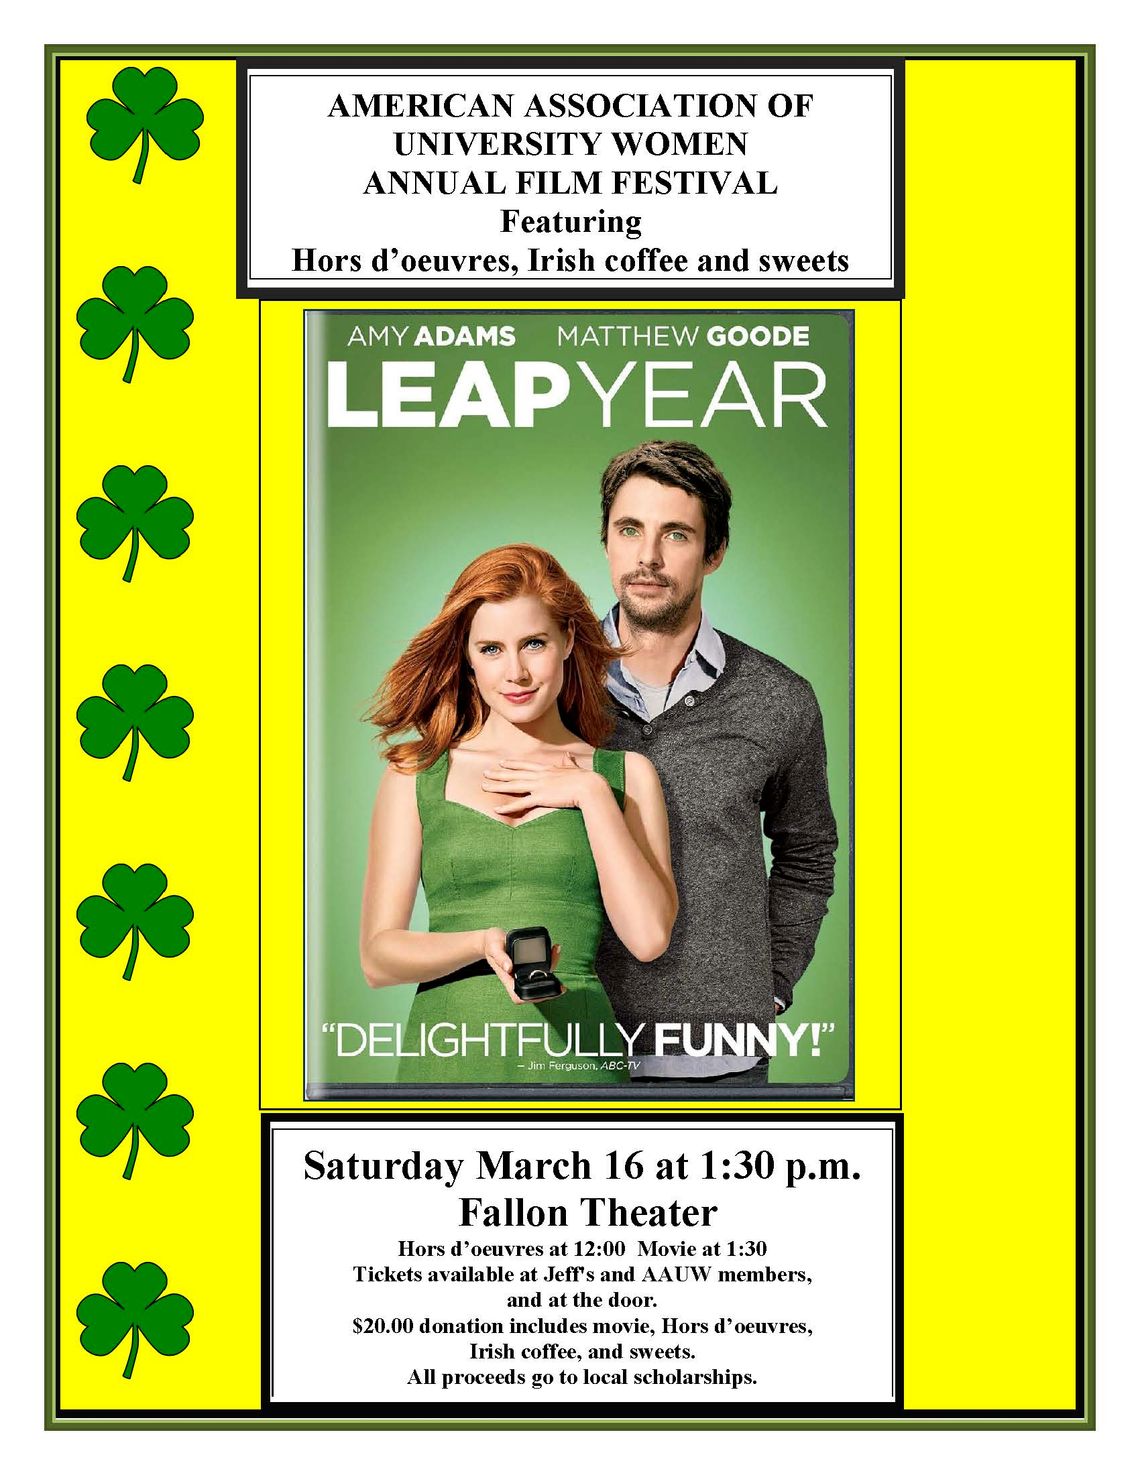 "Leap Year" - the movie